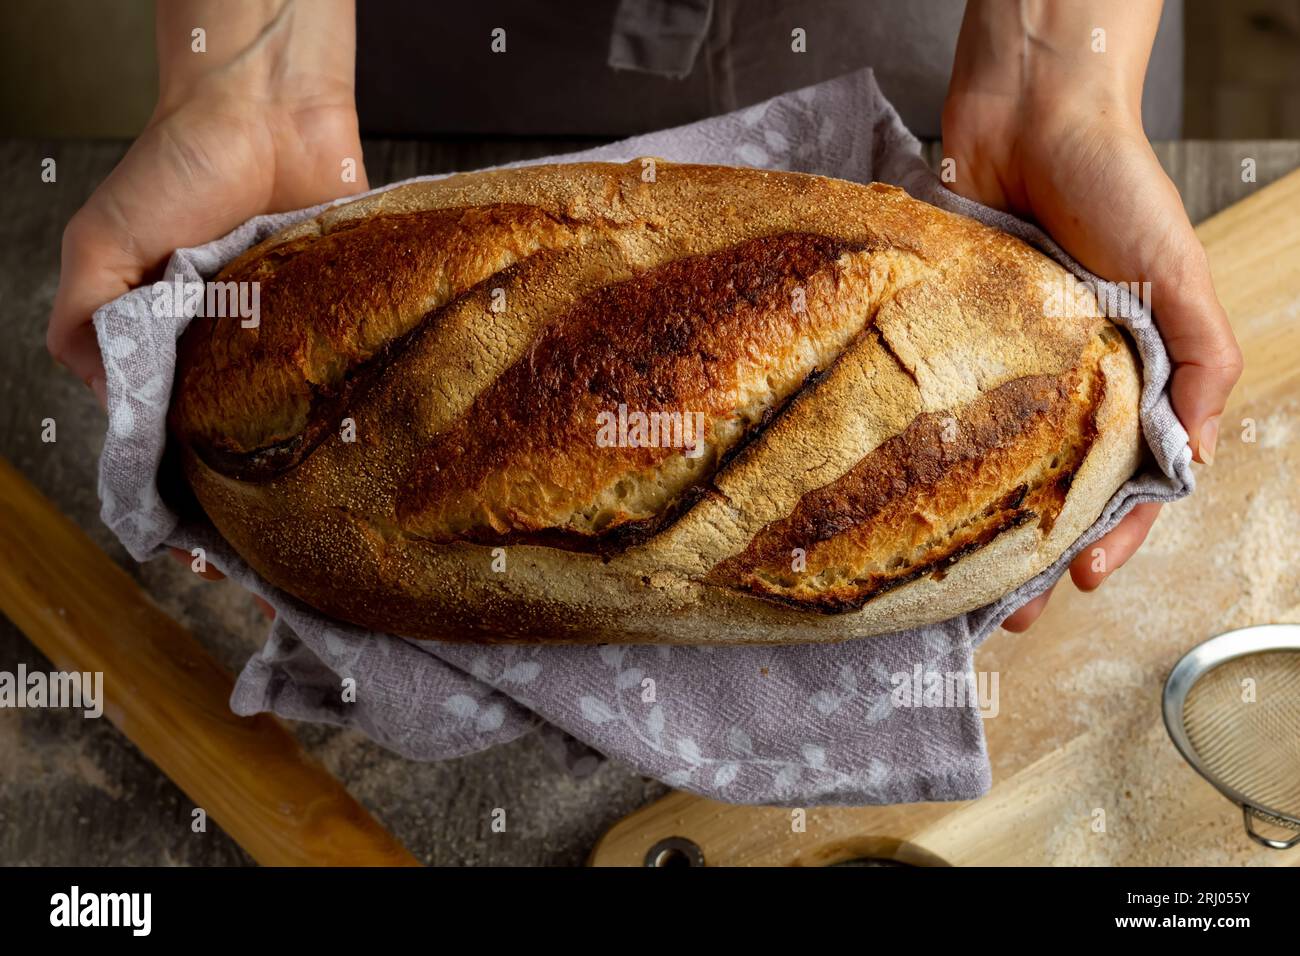 Close-up of freshly baked bread in hands on a wooden board background. Stock Photo